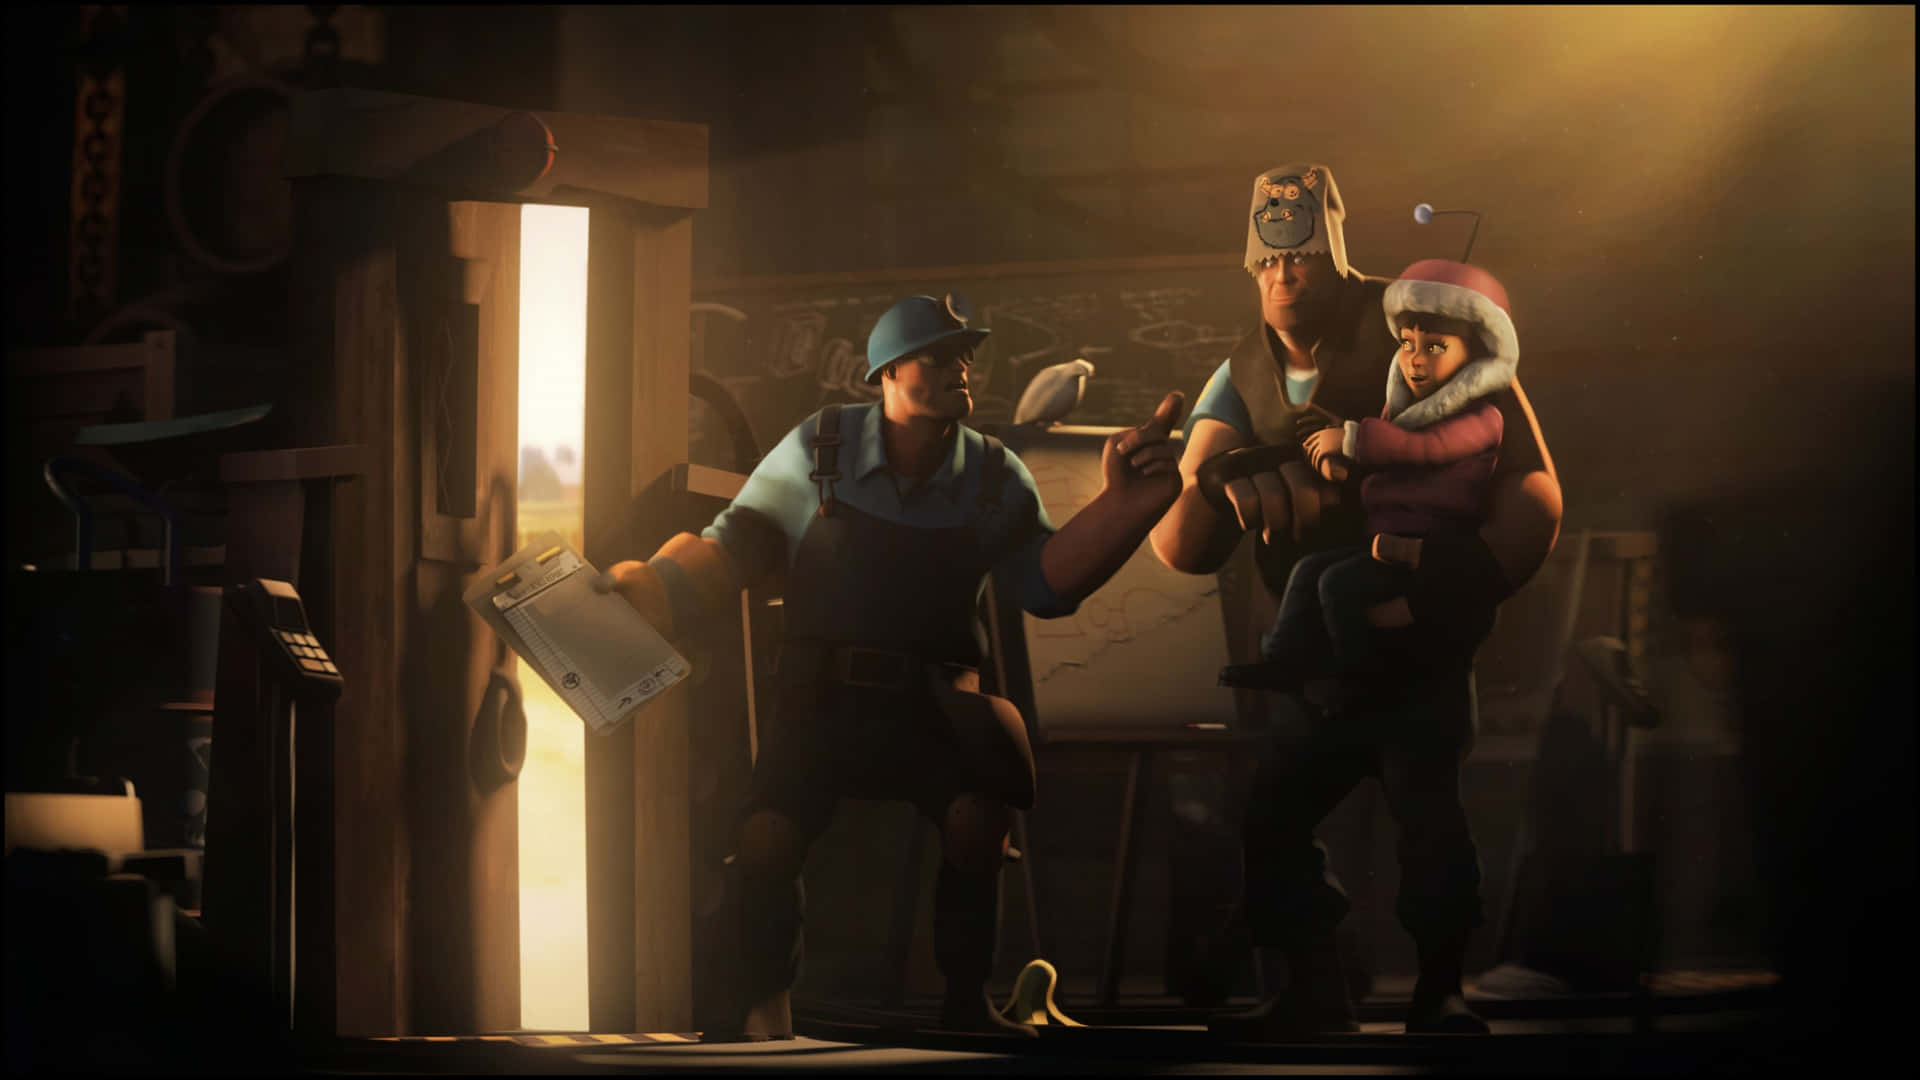 Join the team-based shooter - Team Fortress 2